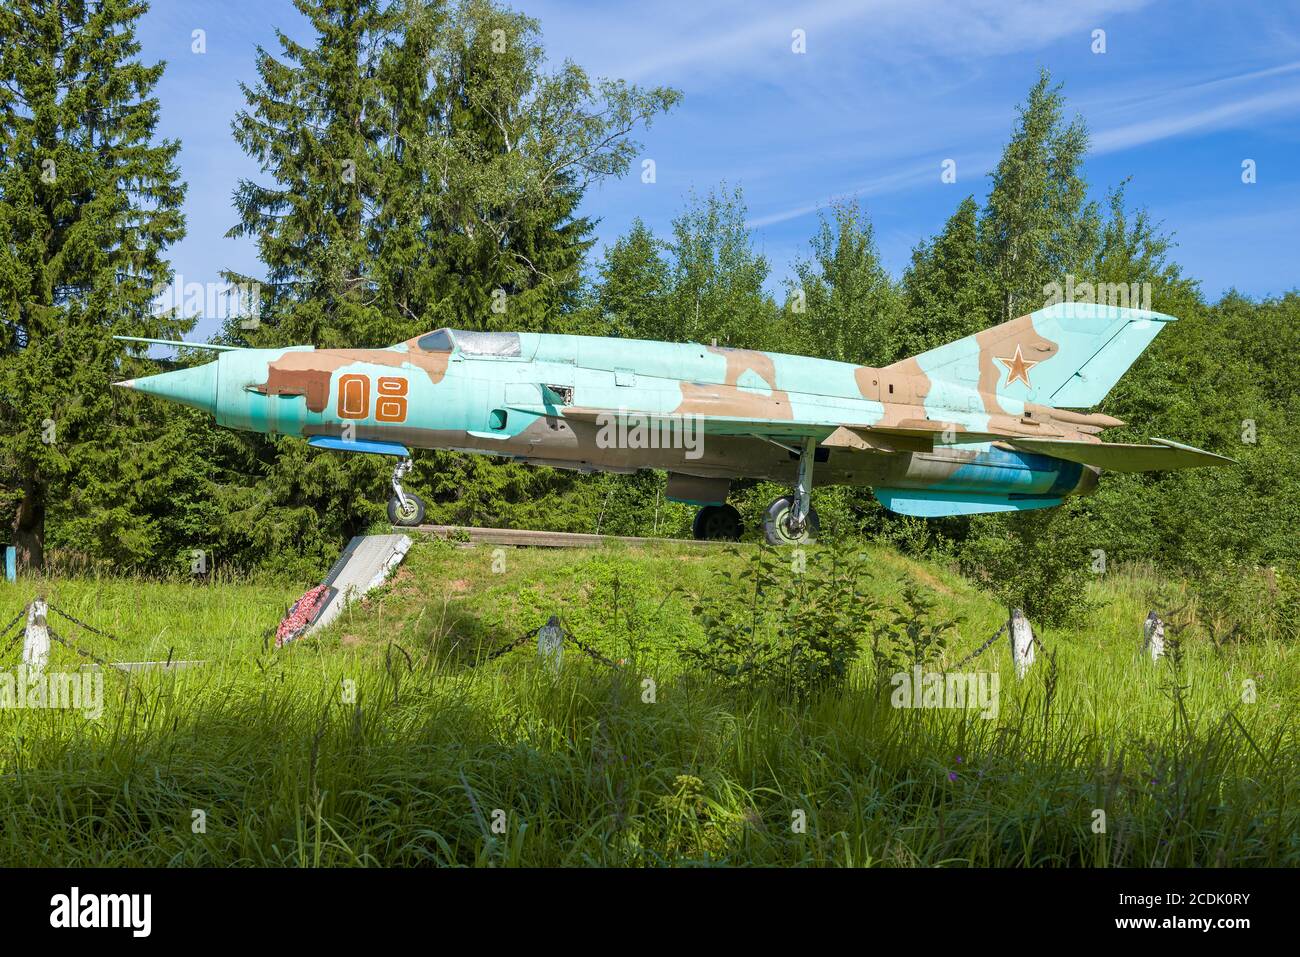 LYUBIMETS, RUSSIA - JULY 19, 2020: Airplane MiG-21 - a monument to the pilots of the military garrison 'Smuravyovo-2' close-up on a sunny July day Stock Photo